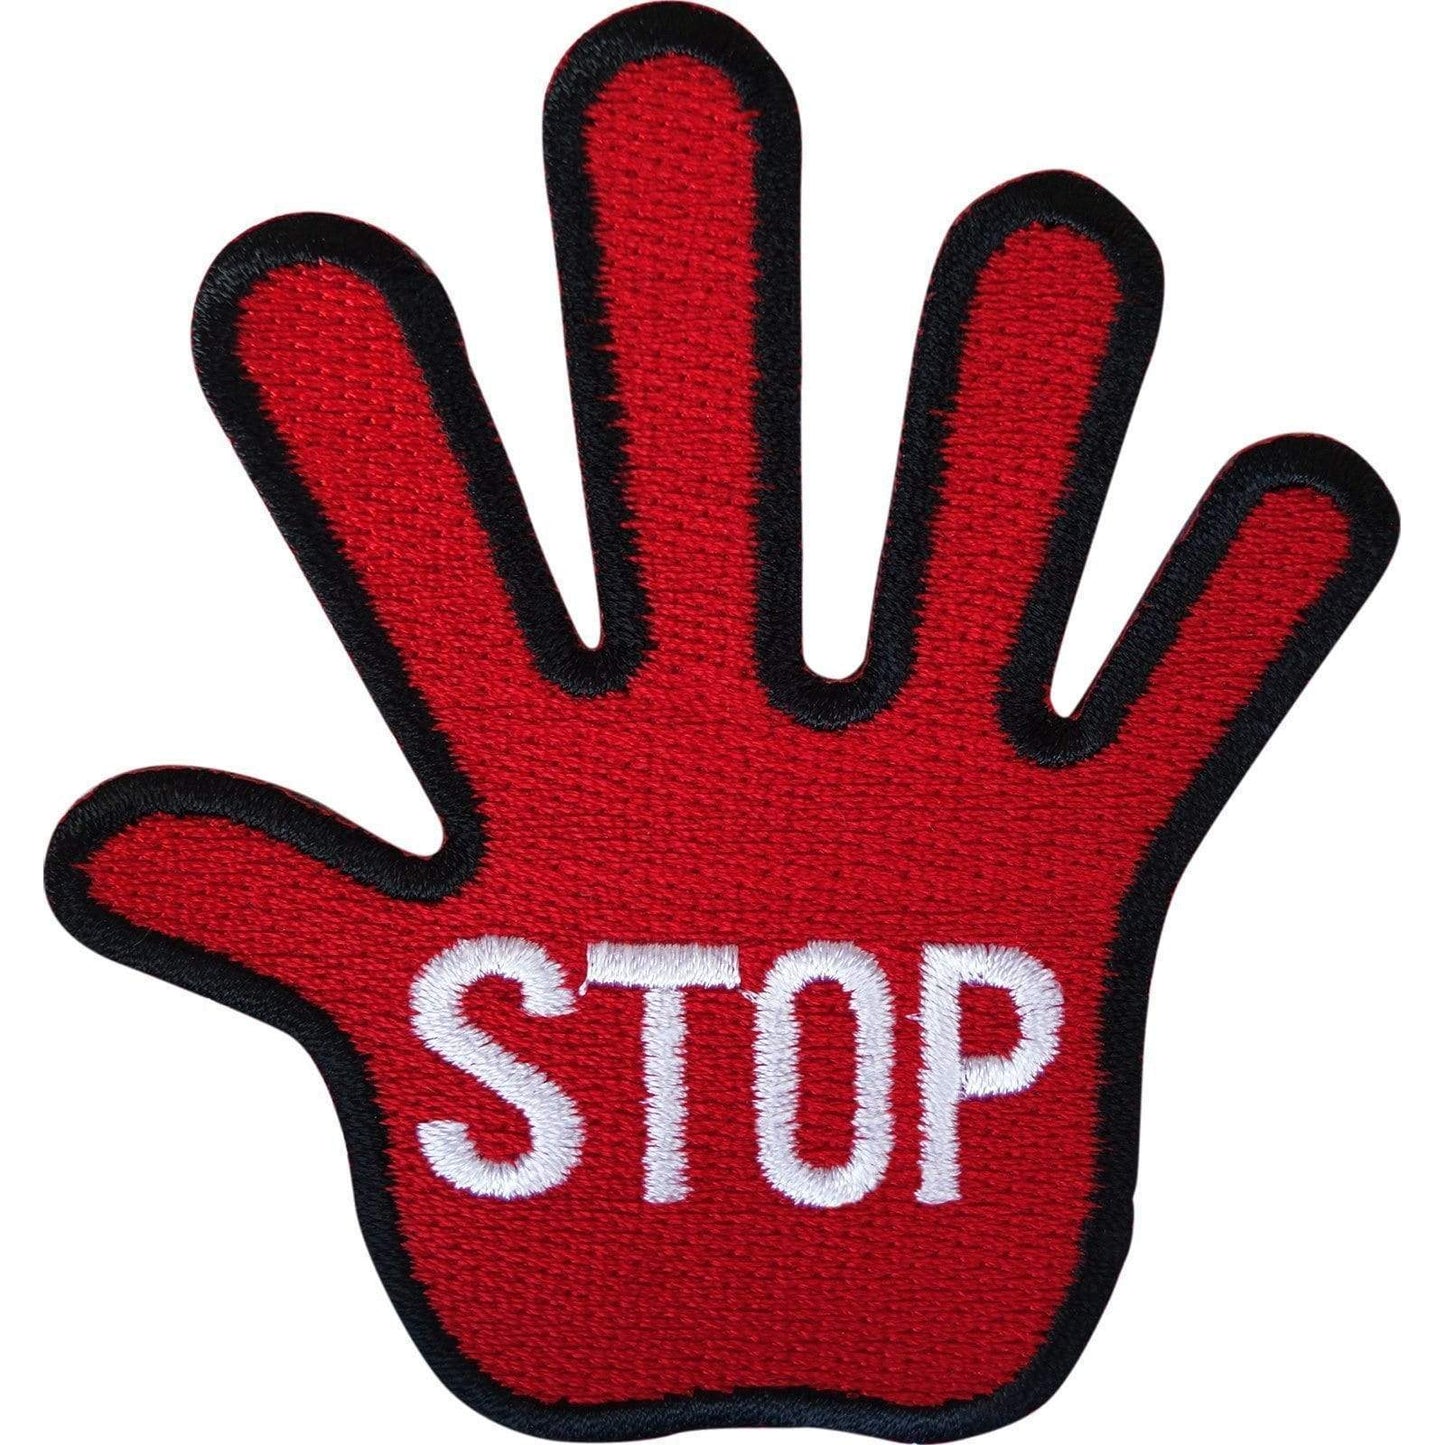 Stop Patch Iron On Sew On Hand Sign Symbol Embroidered Badge Embroidery Applique